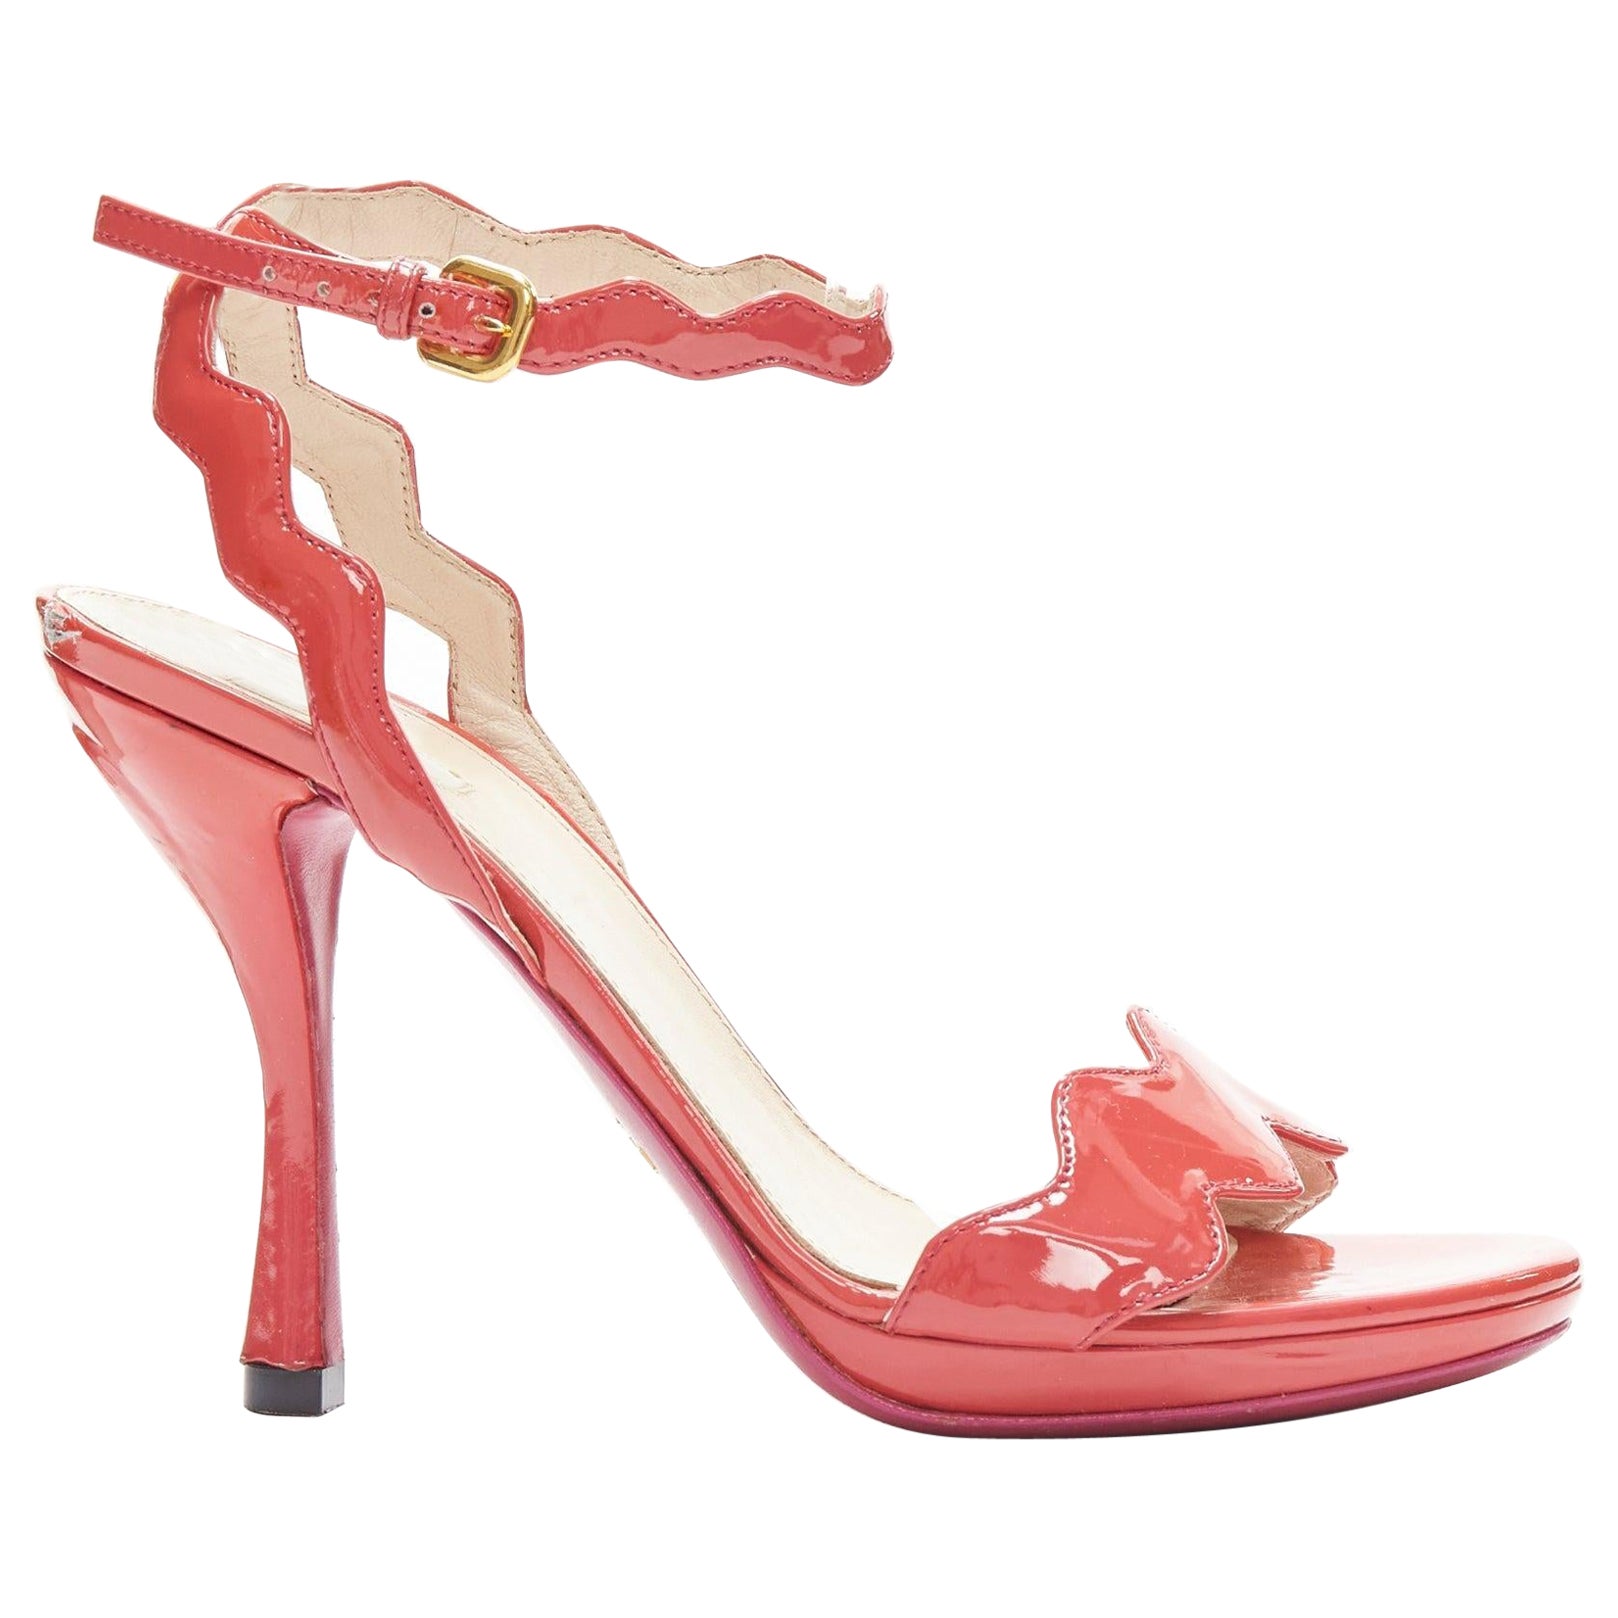 PRADA rose pink patent leather squiggly strap sandal heels EU38.5 For Sale